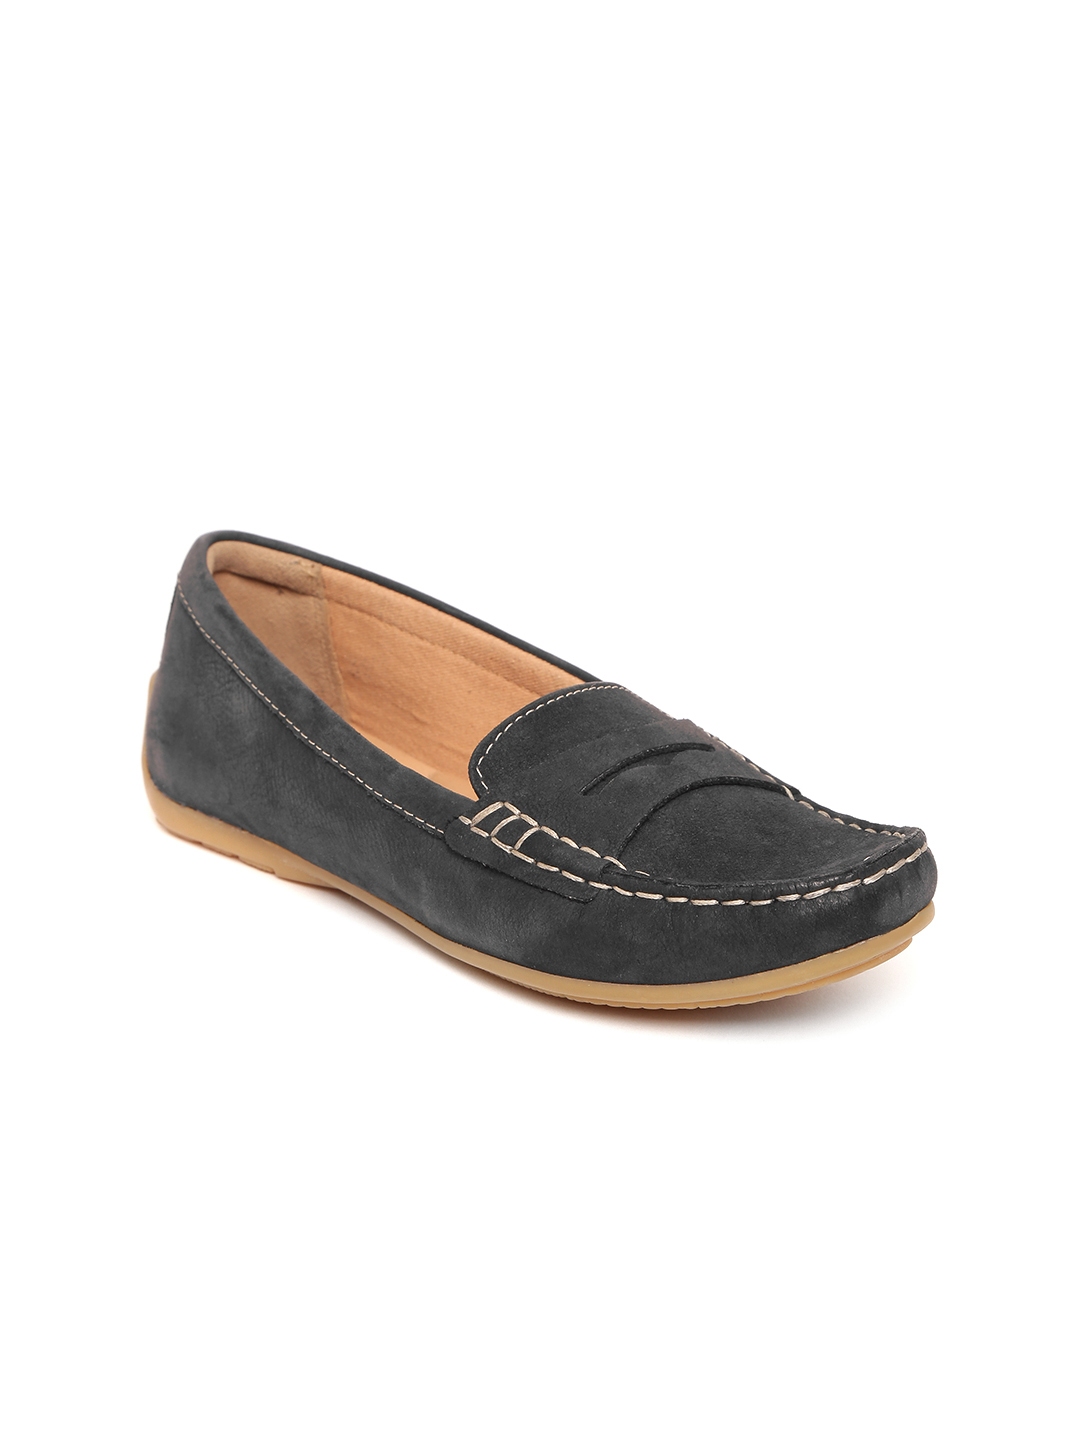 Buy Clarks Women Charcoal Grey Loafers - Casual Shoes for Women 6521275 ...